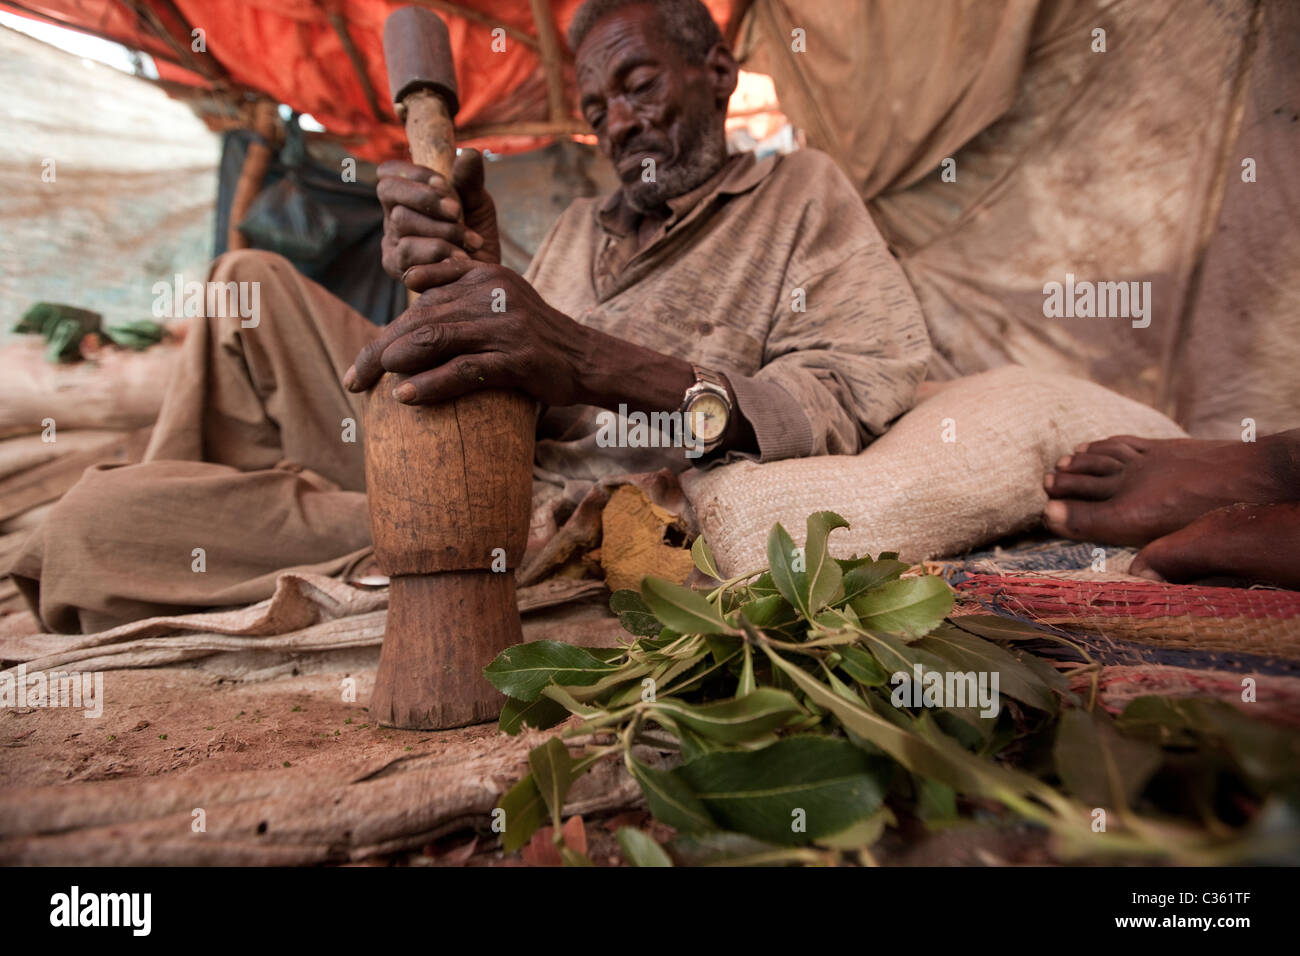 Khat chewer pounding leaves - Old Town, Harar Ethiopia, Africa Stock Photo